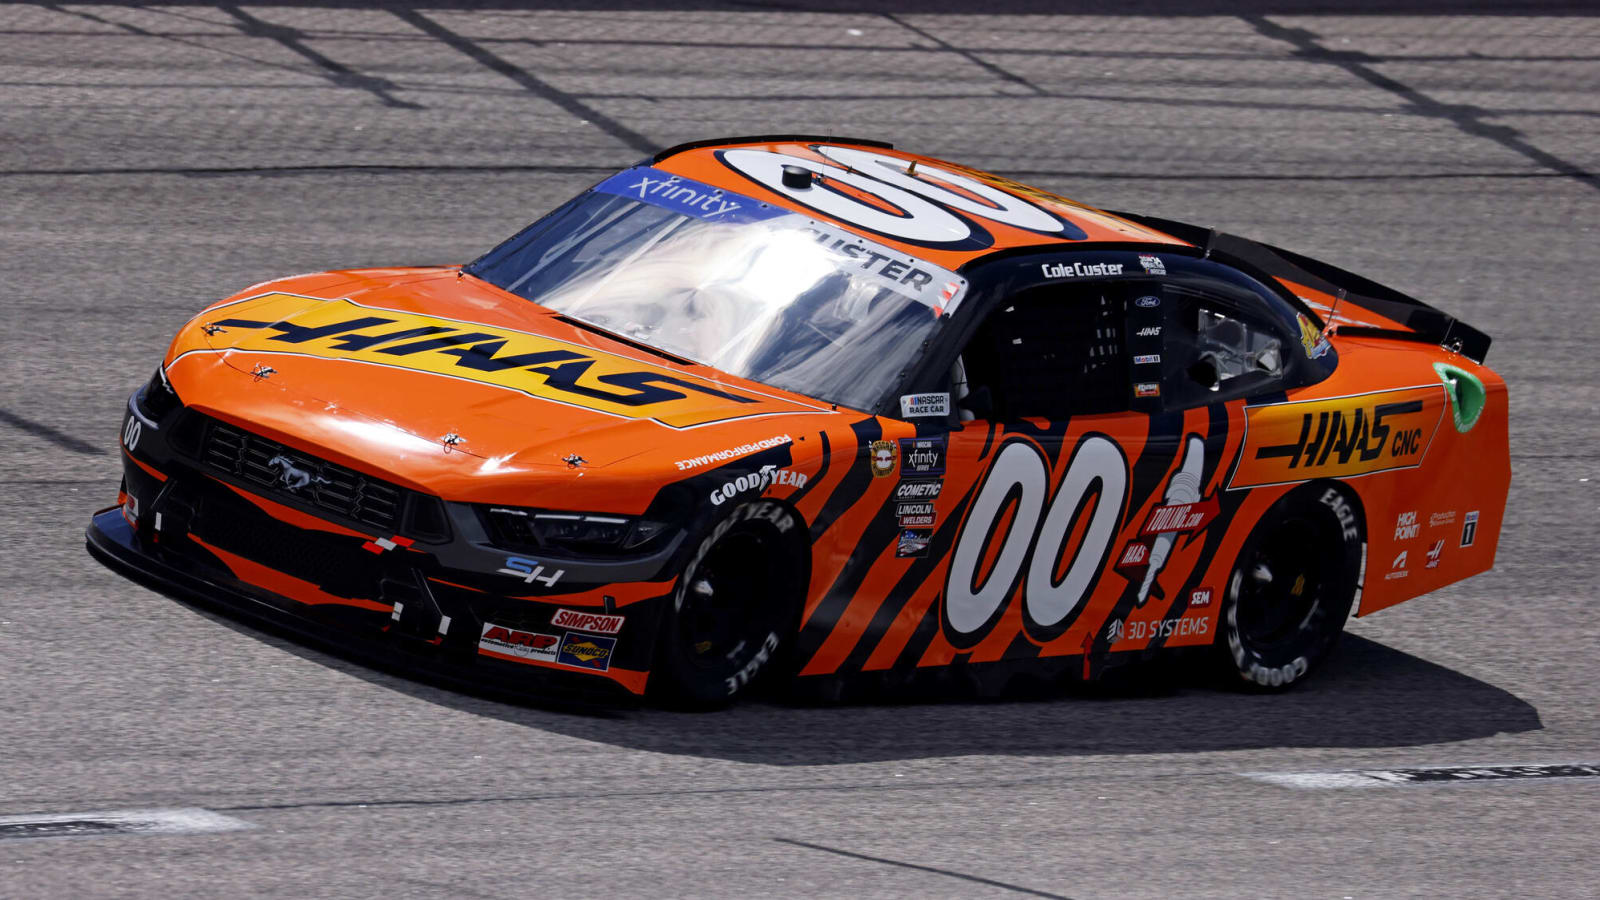 Xfinity Series' Cole Custer stays consistent at Darlington